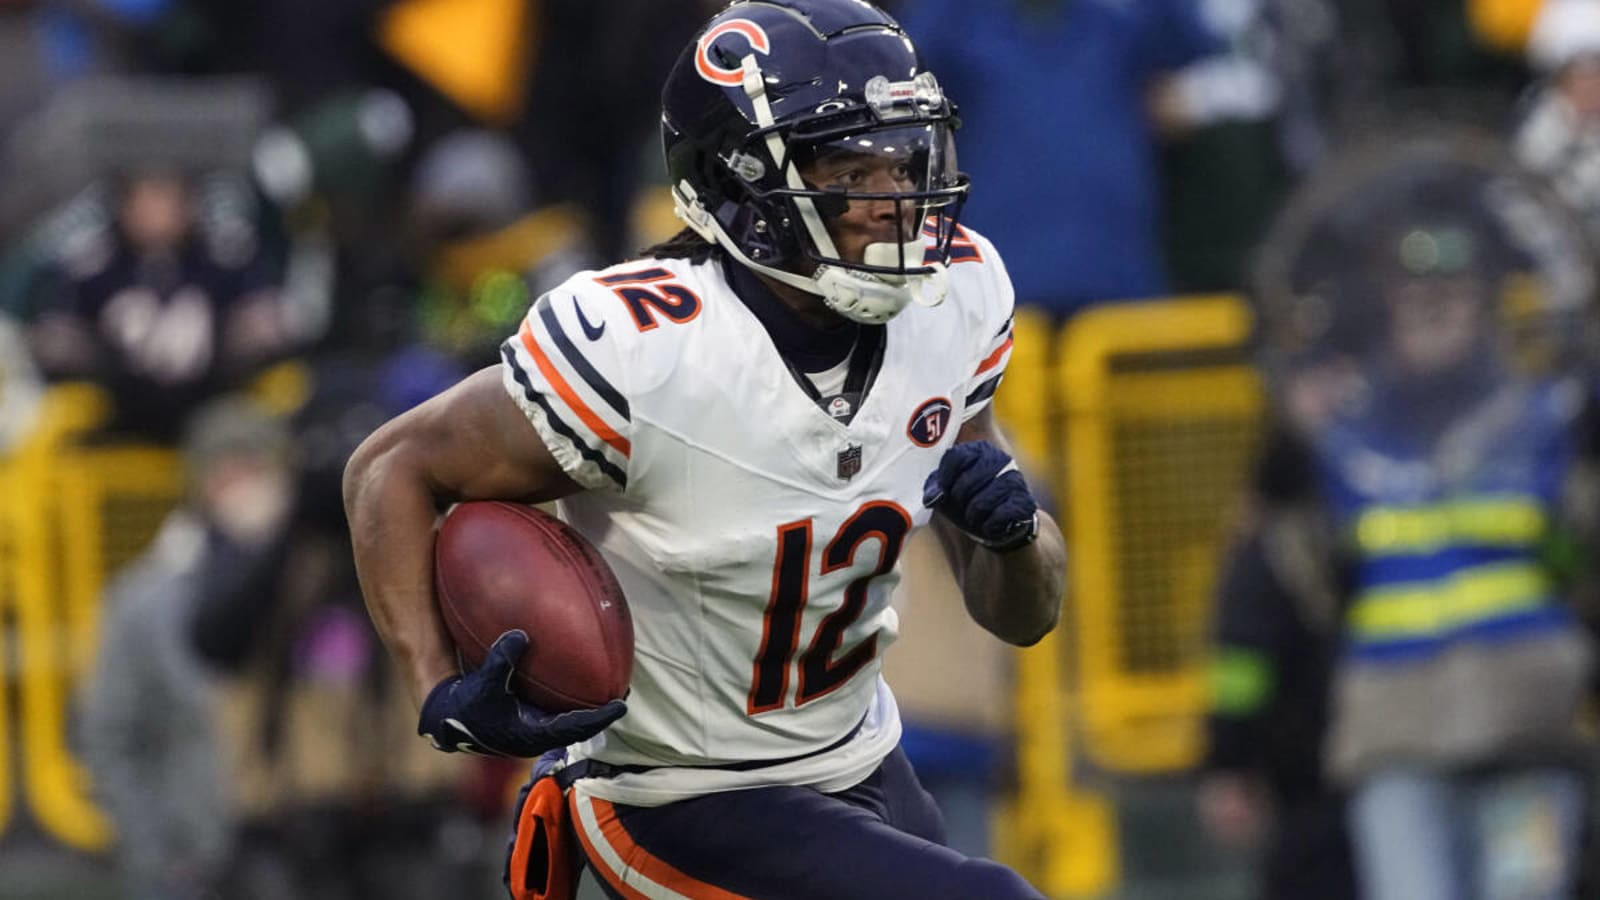 Bears special teams coordinator reveals who will initially serve as the main returner under the new kickoff rules